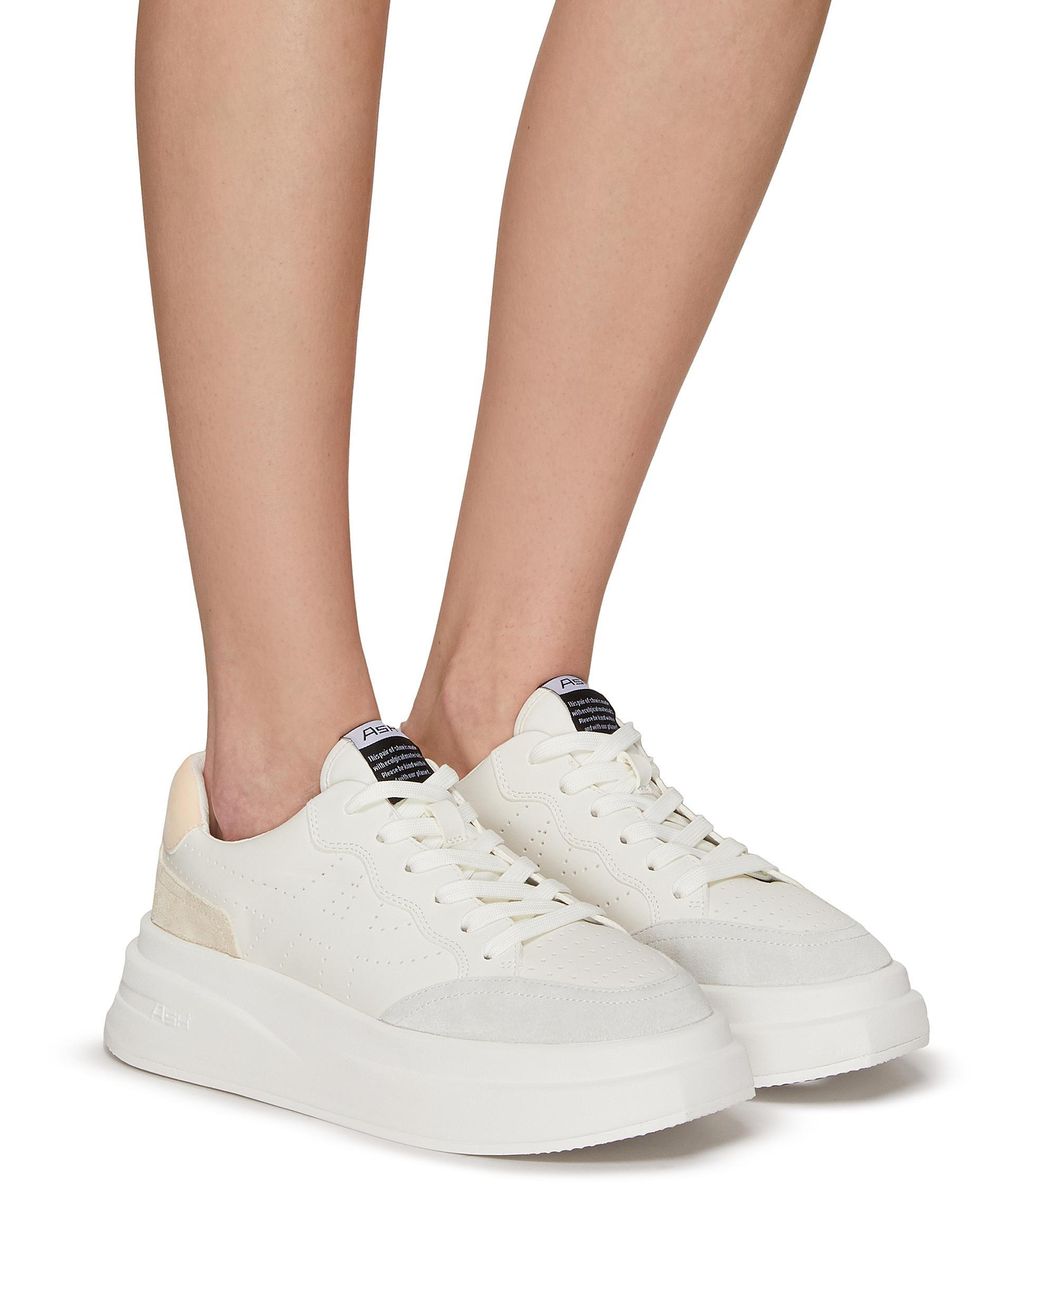 Ash 'impuls' Leather Platform Sneakers in White | Lyst